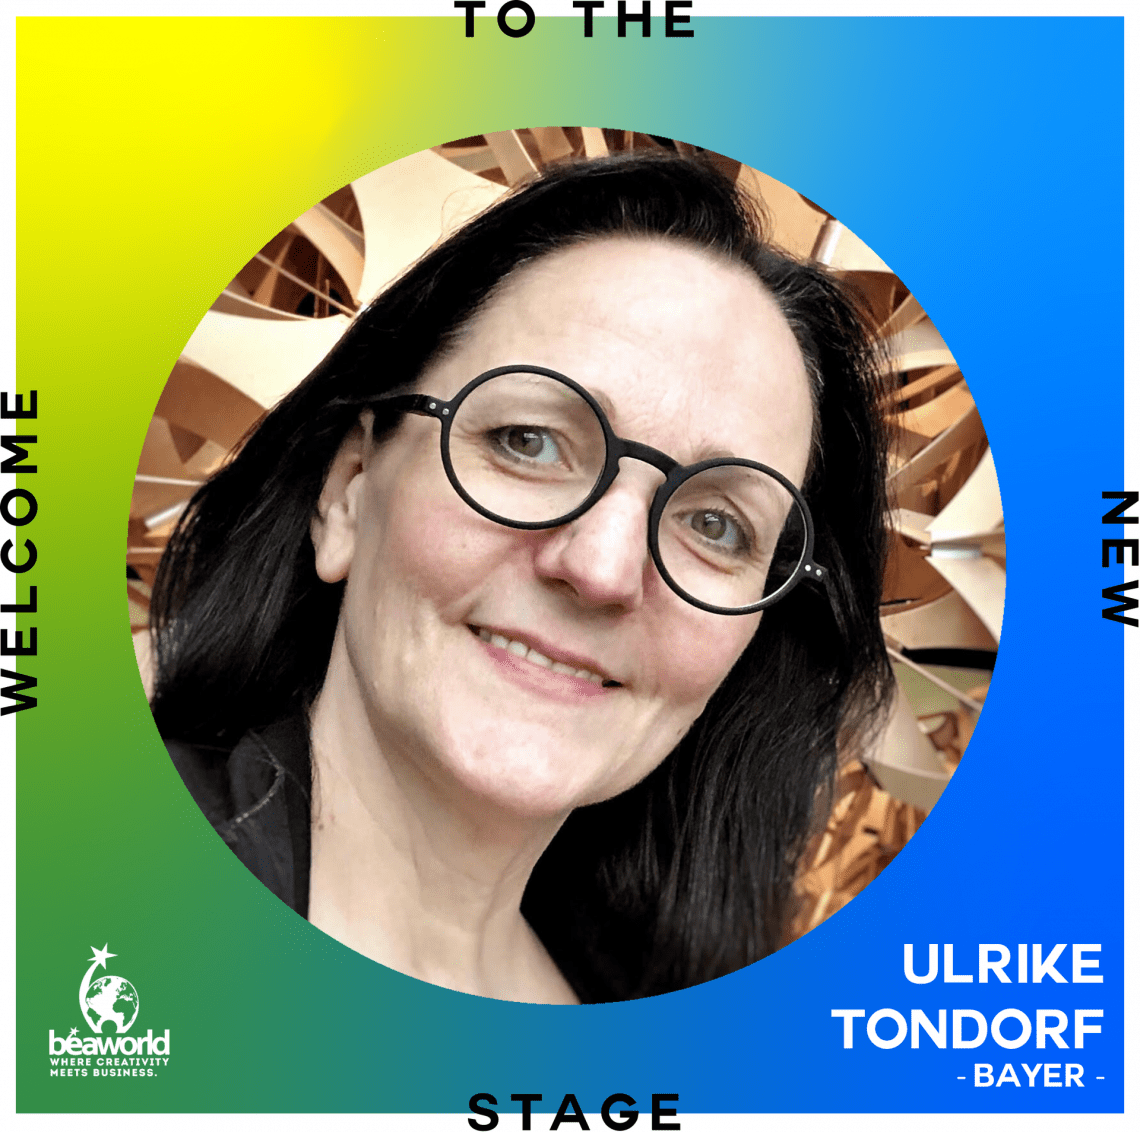 Bild zu Ulrike Tondorf, Head of Brand Activation & Engagement at Bayer, will chair the corporate Jury of the Best Event Awards 2021.